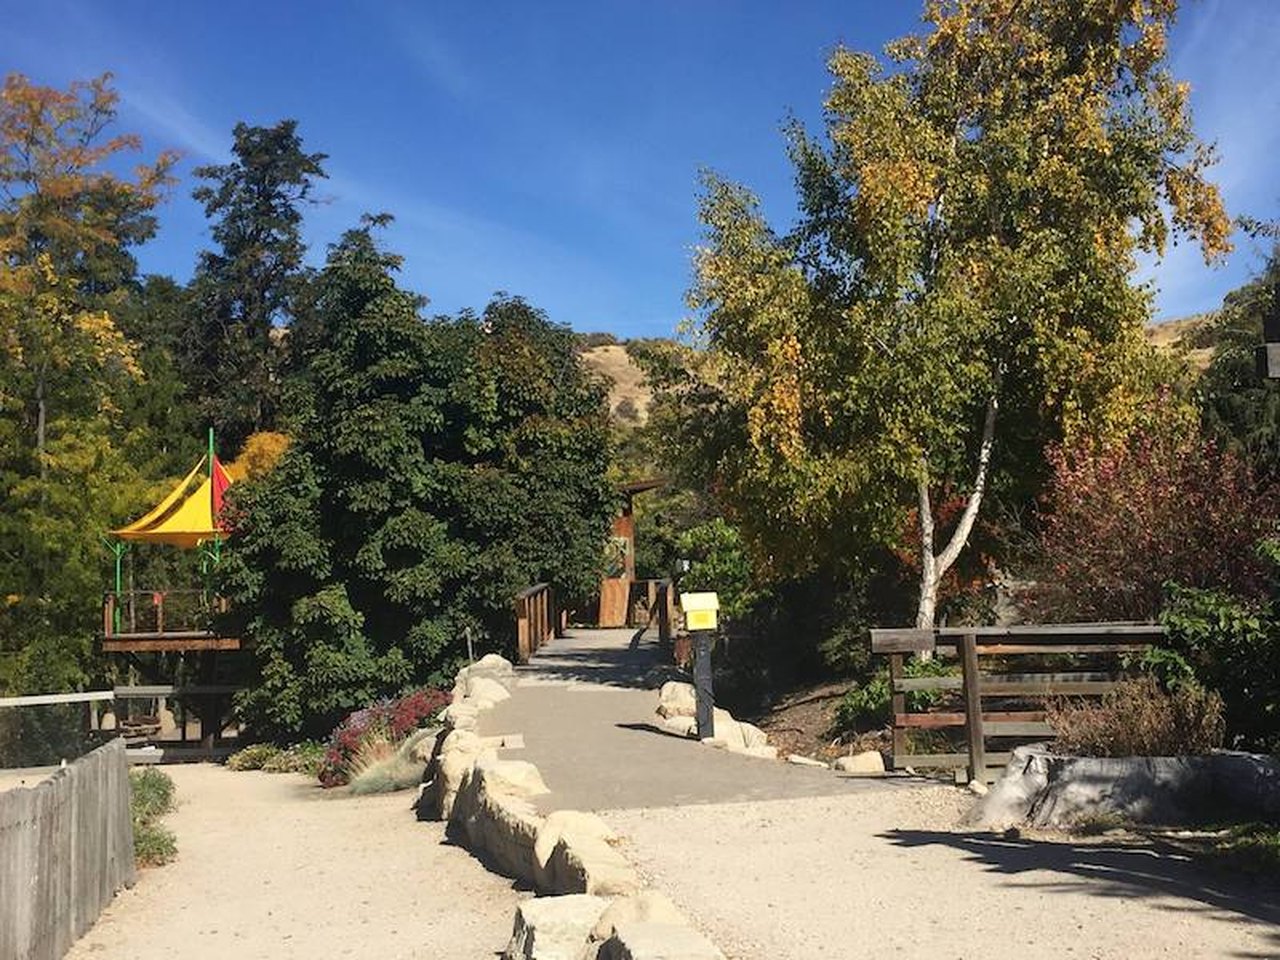 The Idaho Botanical Garden holds the best fall harvest every fall ...